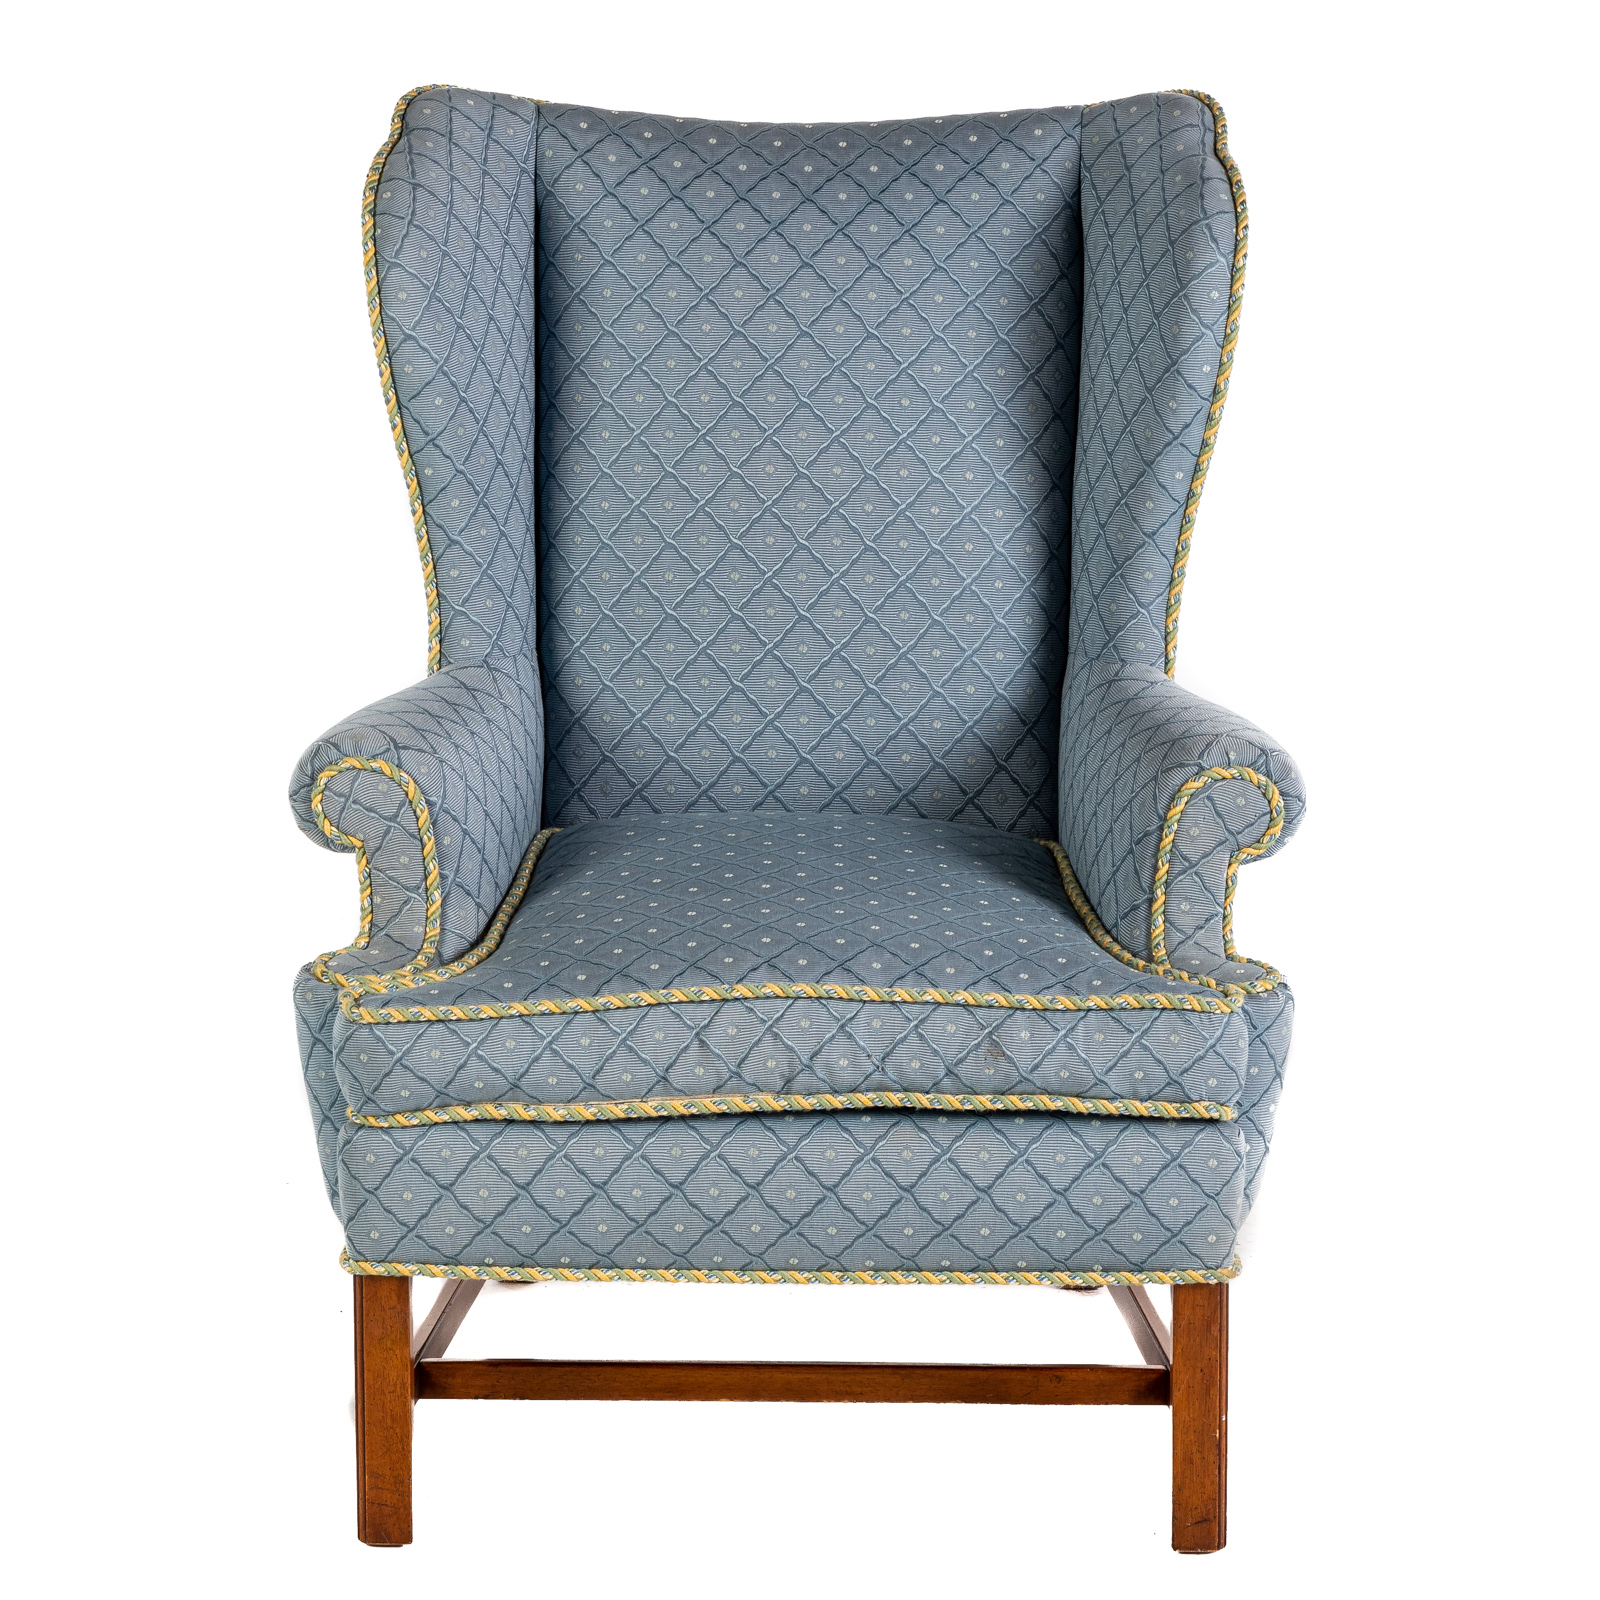 CHIPPENDALE STYLE UPHOLSTERED WING